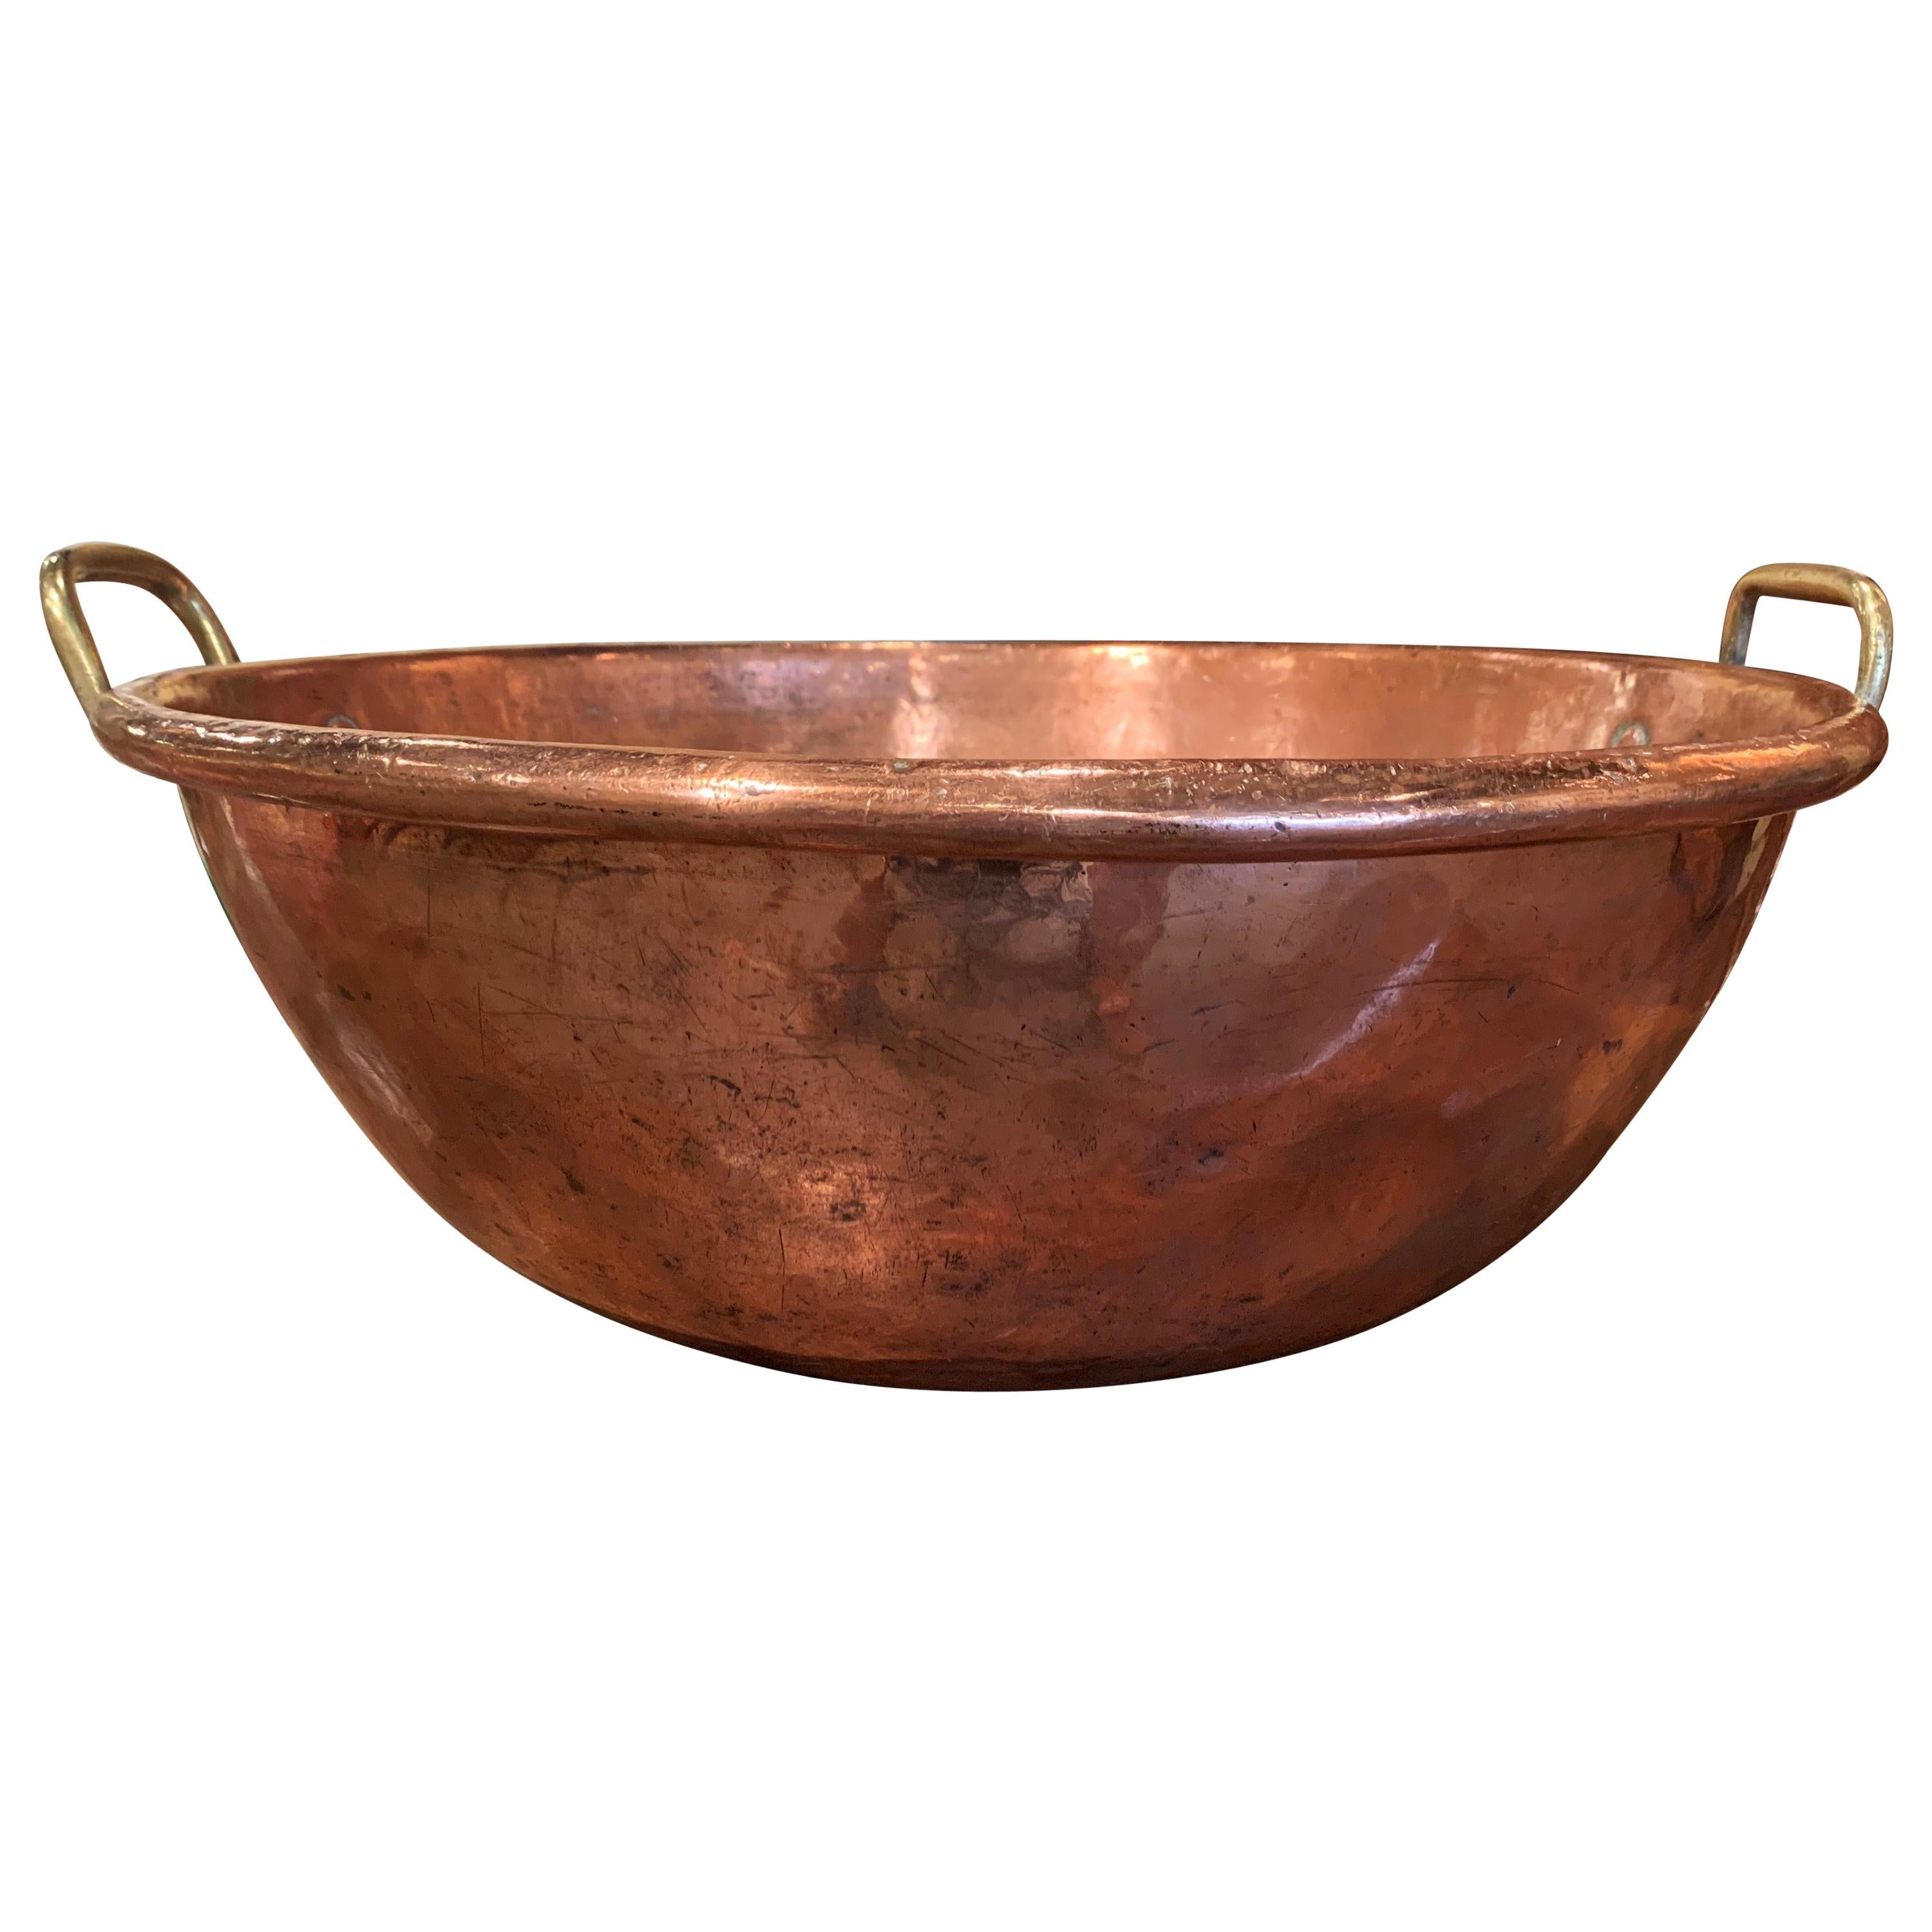 19th Century French Copper over Brass Jelly Bowl from Normandy